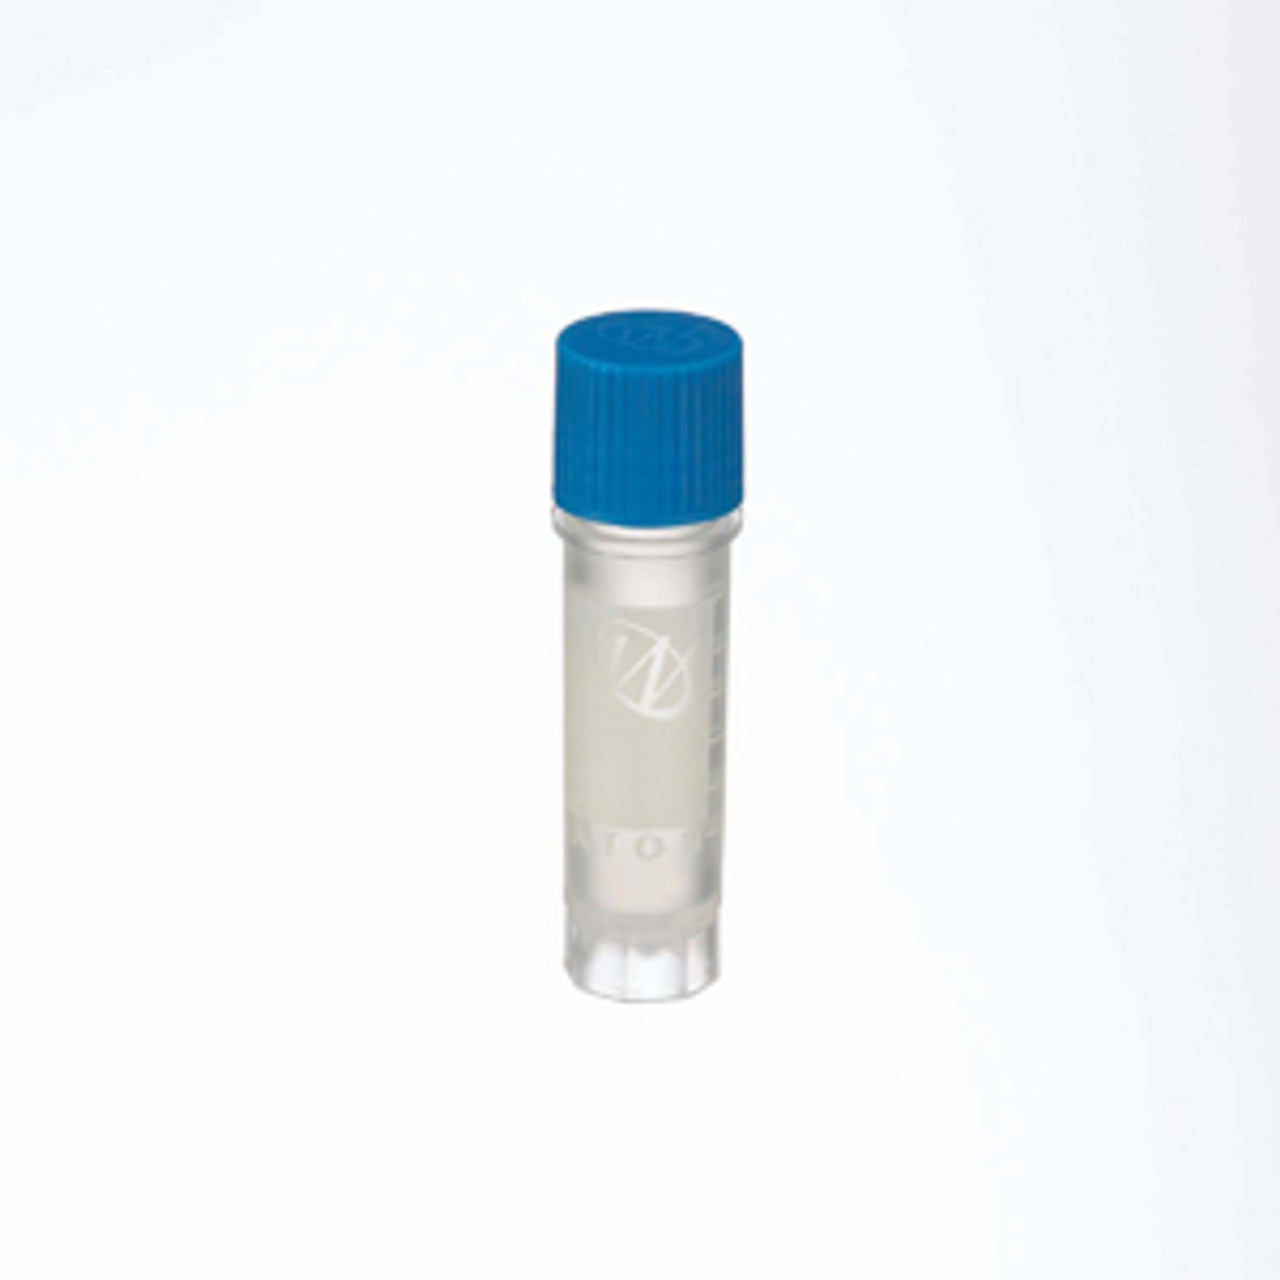 WHEATON® 2mL Ext FS CryoElite Vials with Marking Spot, Blue Caps, Sterile, case/500